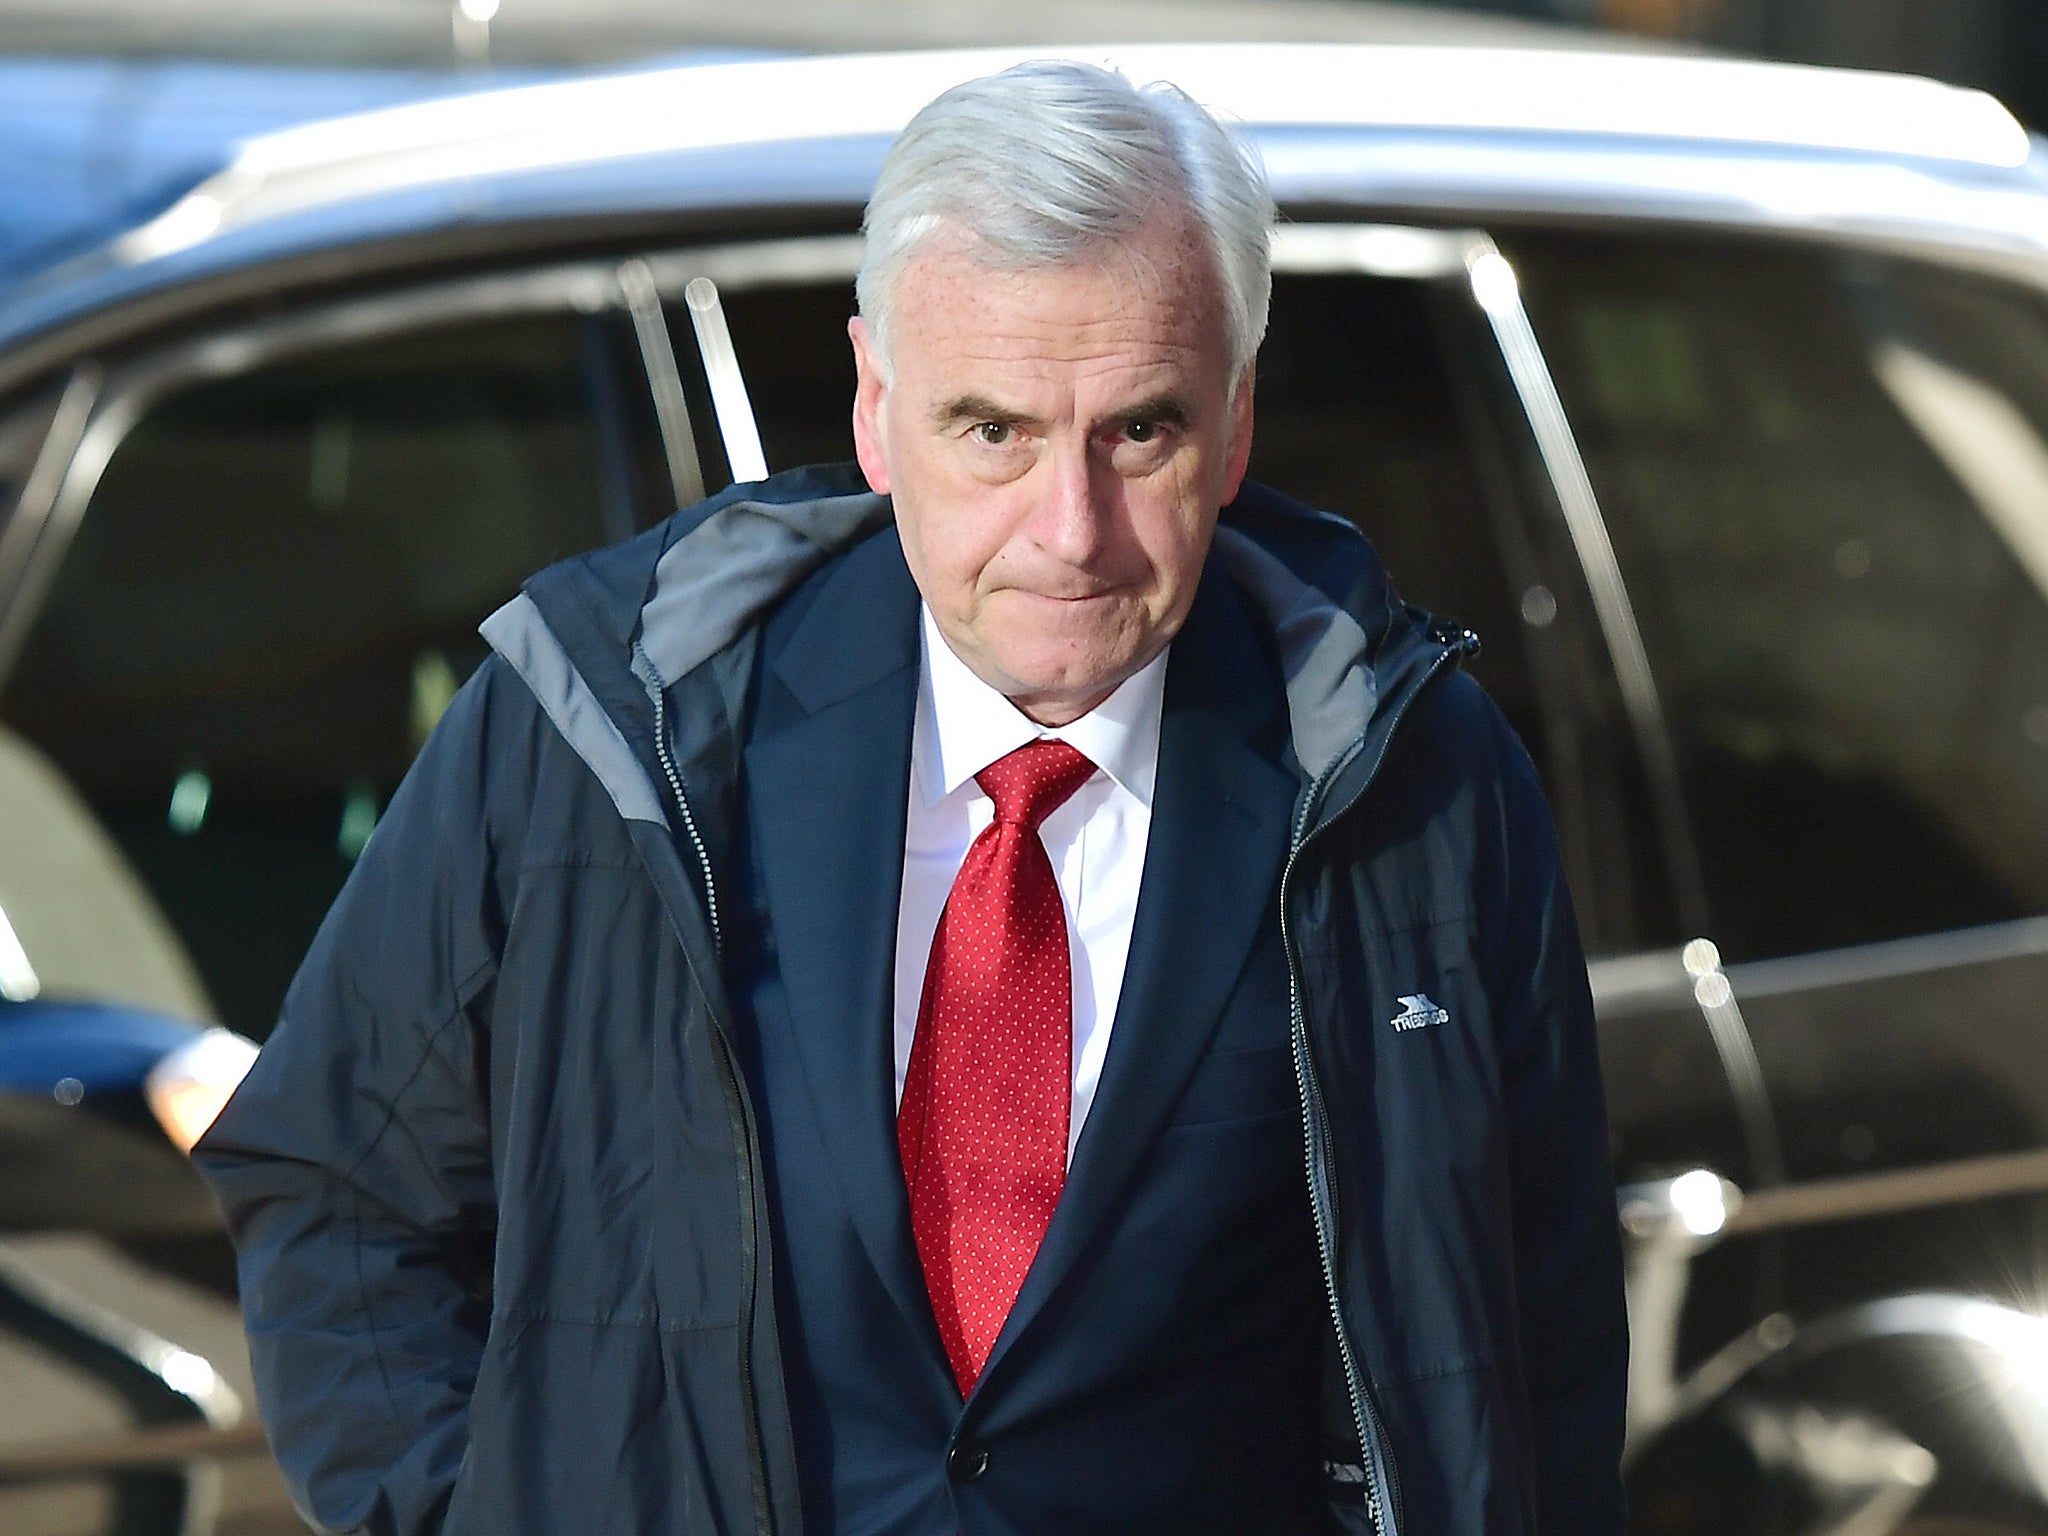 John McDonnell said Labour remains on a 'general election footing'